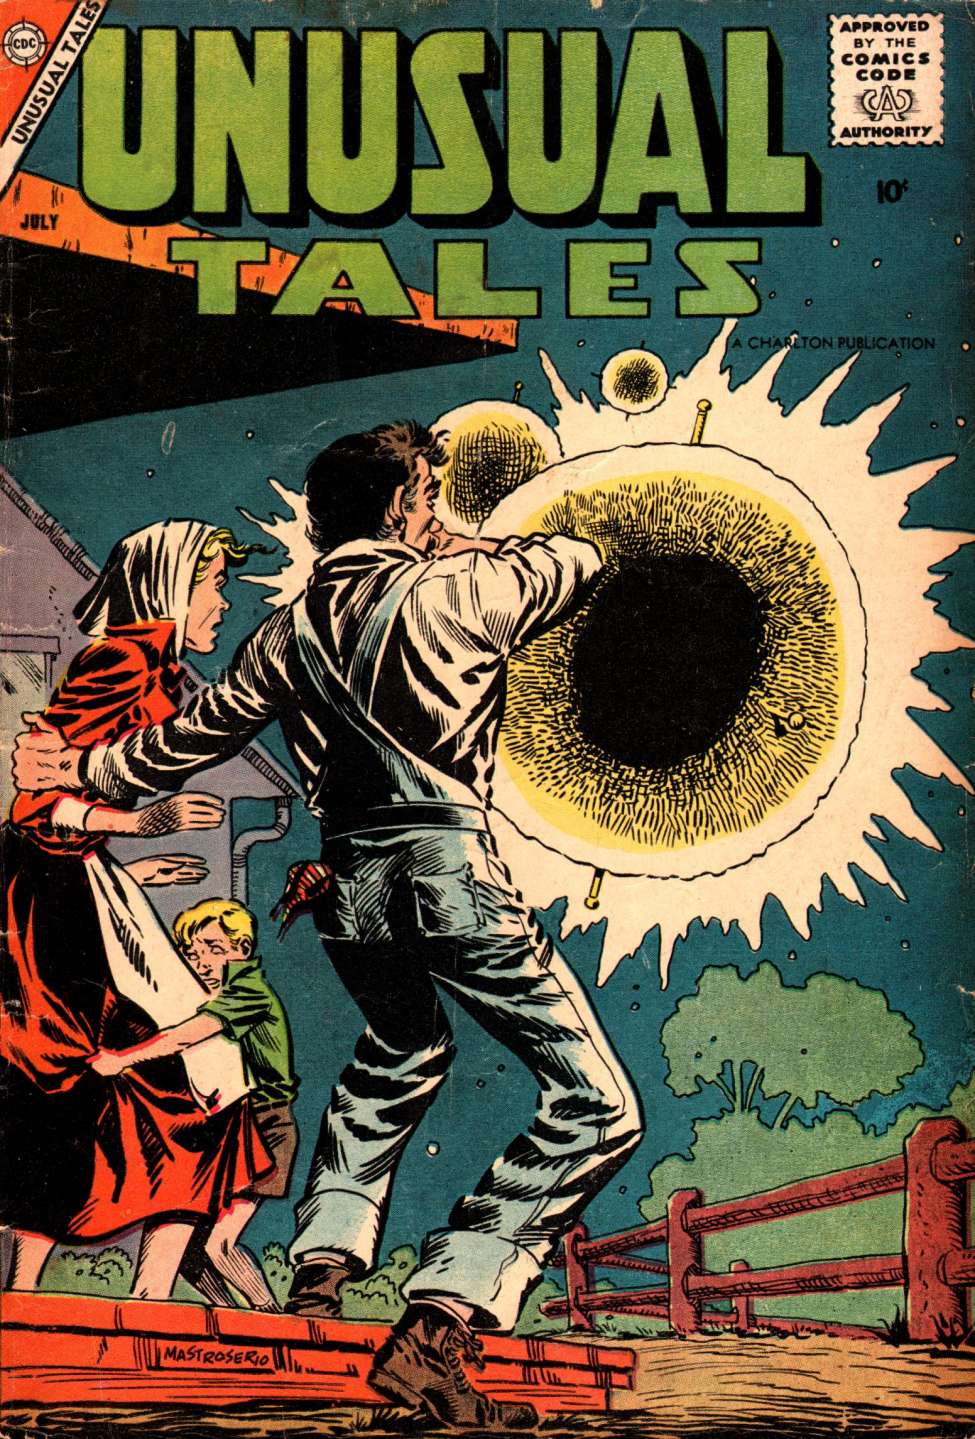 Comic Book Cover For Unusual Tales 12